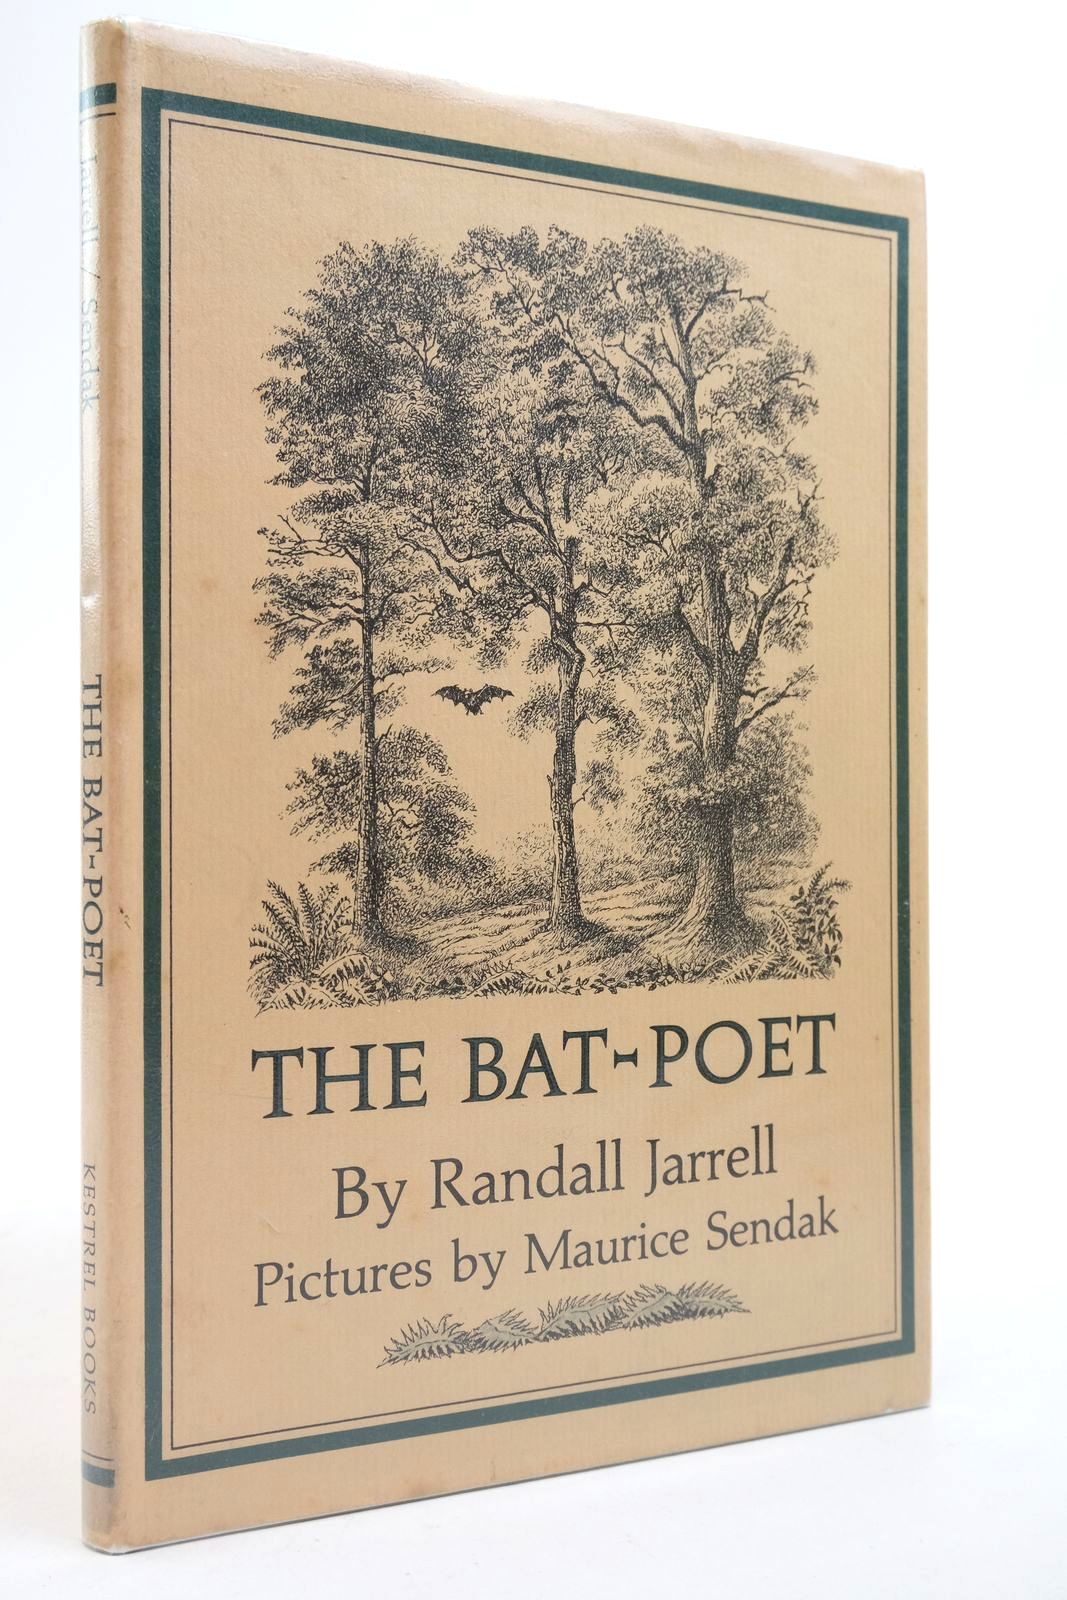 Photo of THE BAT-POET written by Jarrell, Randall illustrated by Sendak, Maurice published by Kestrel Books (STOCK CODE: 2140103)  for sale by Stella & Rose's Books